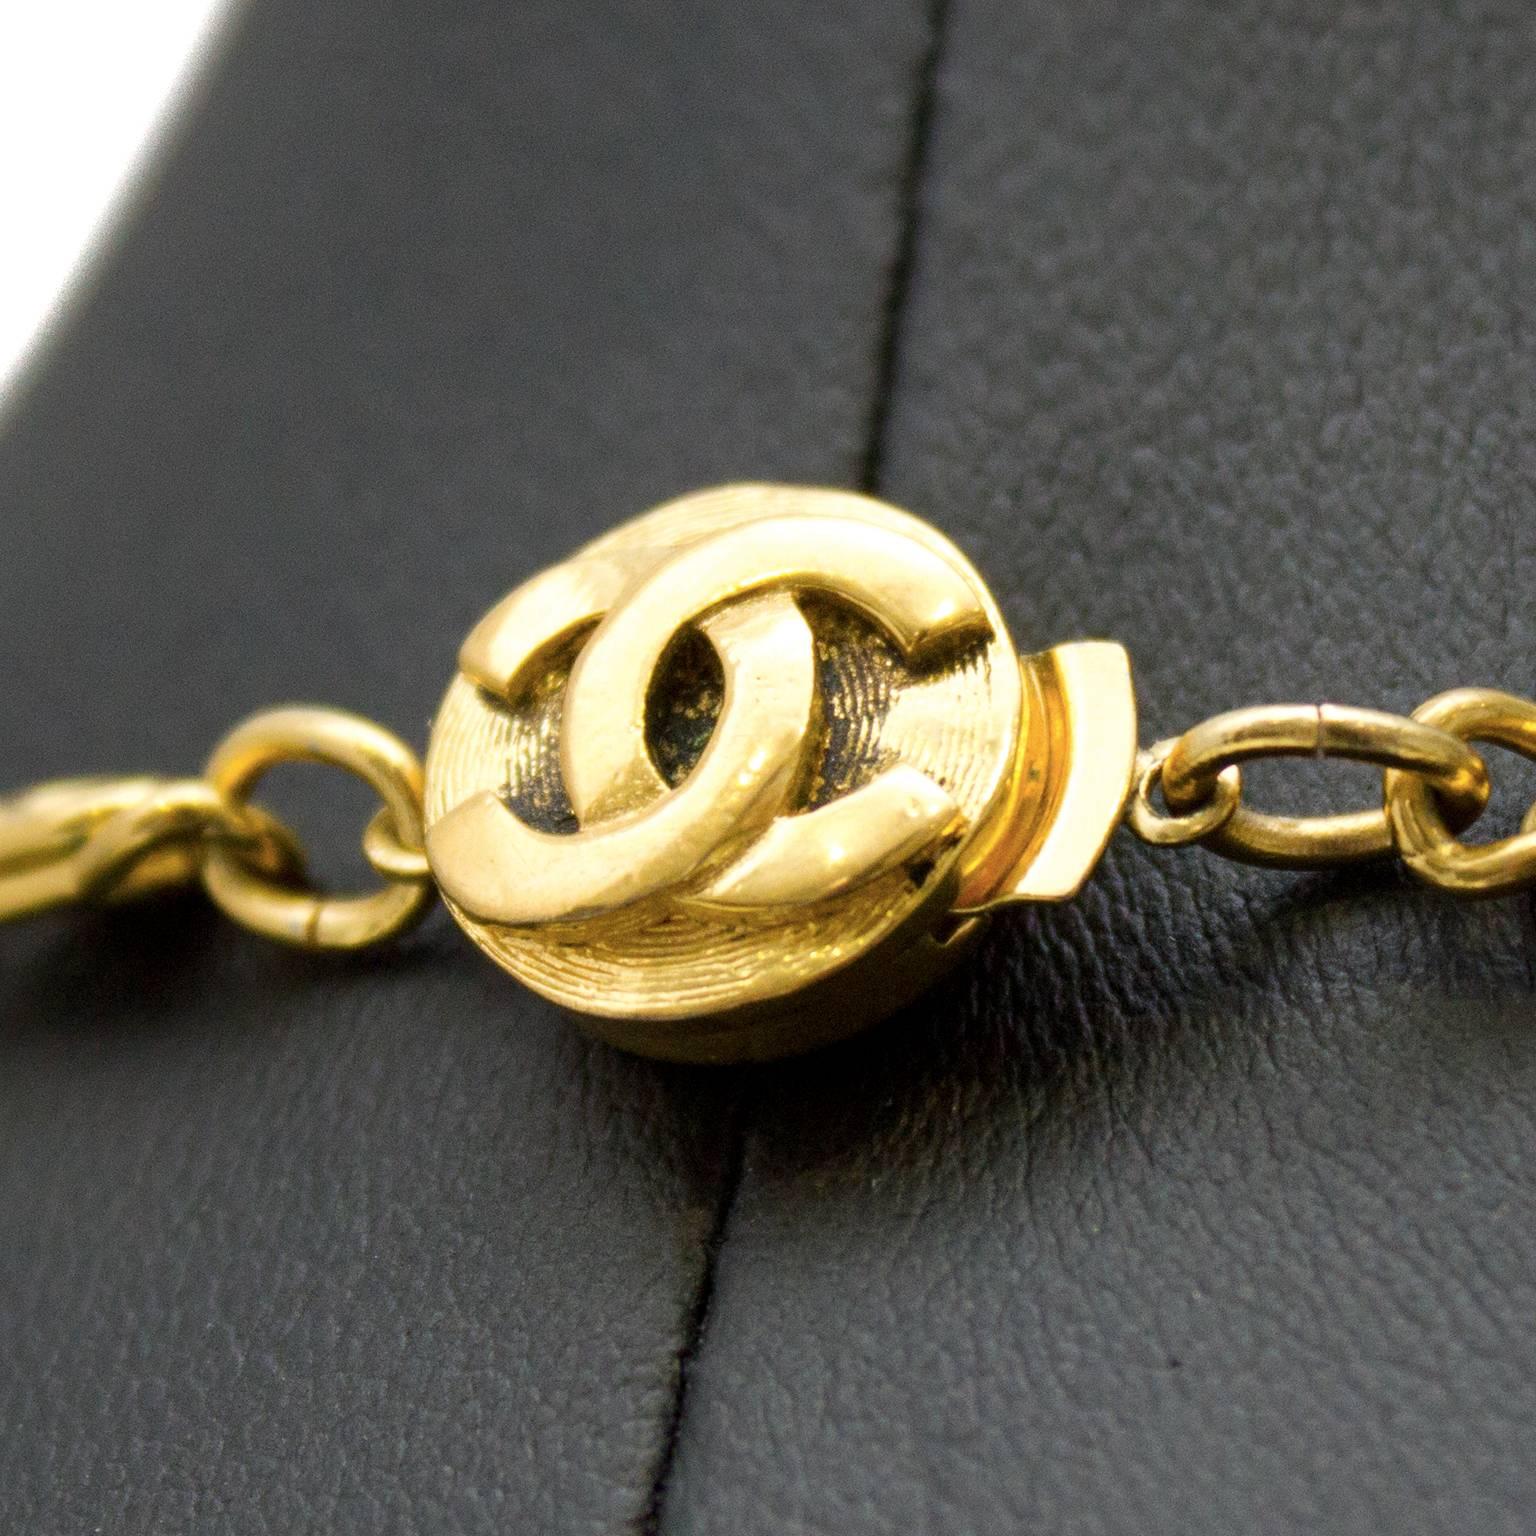 Women's 1980s Chanel Coin Necklace with Face Motif